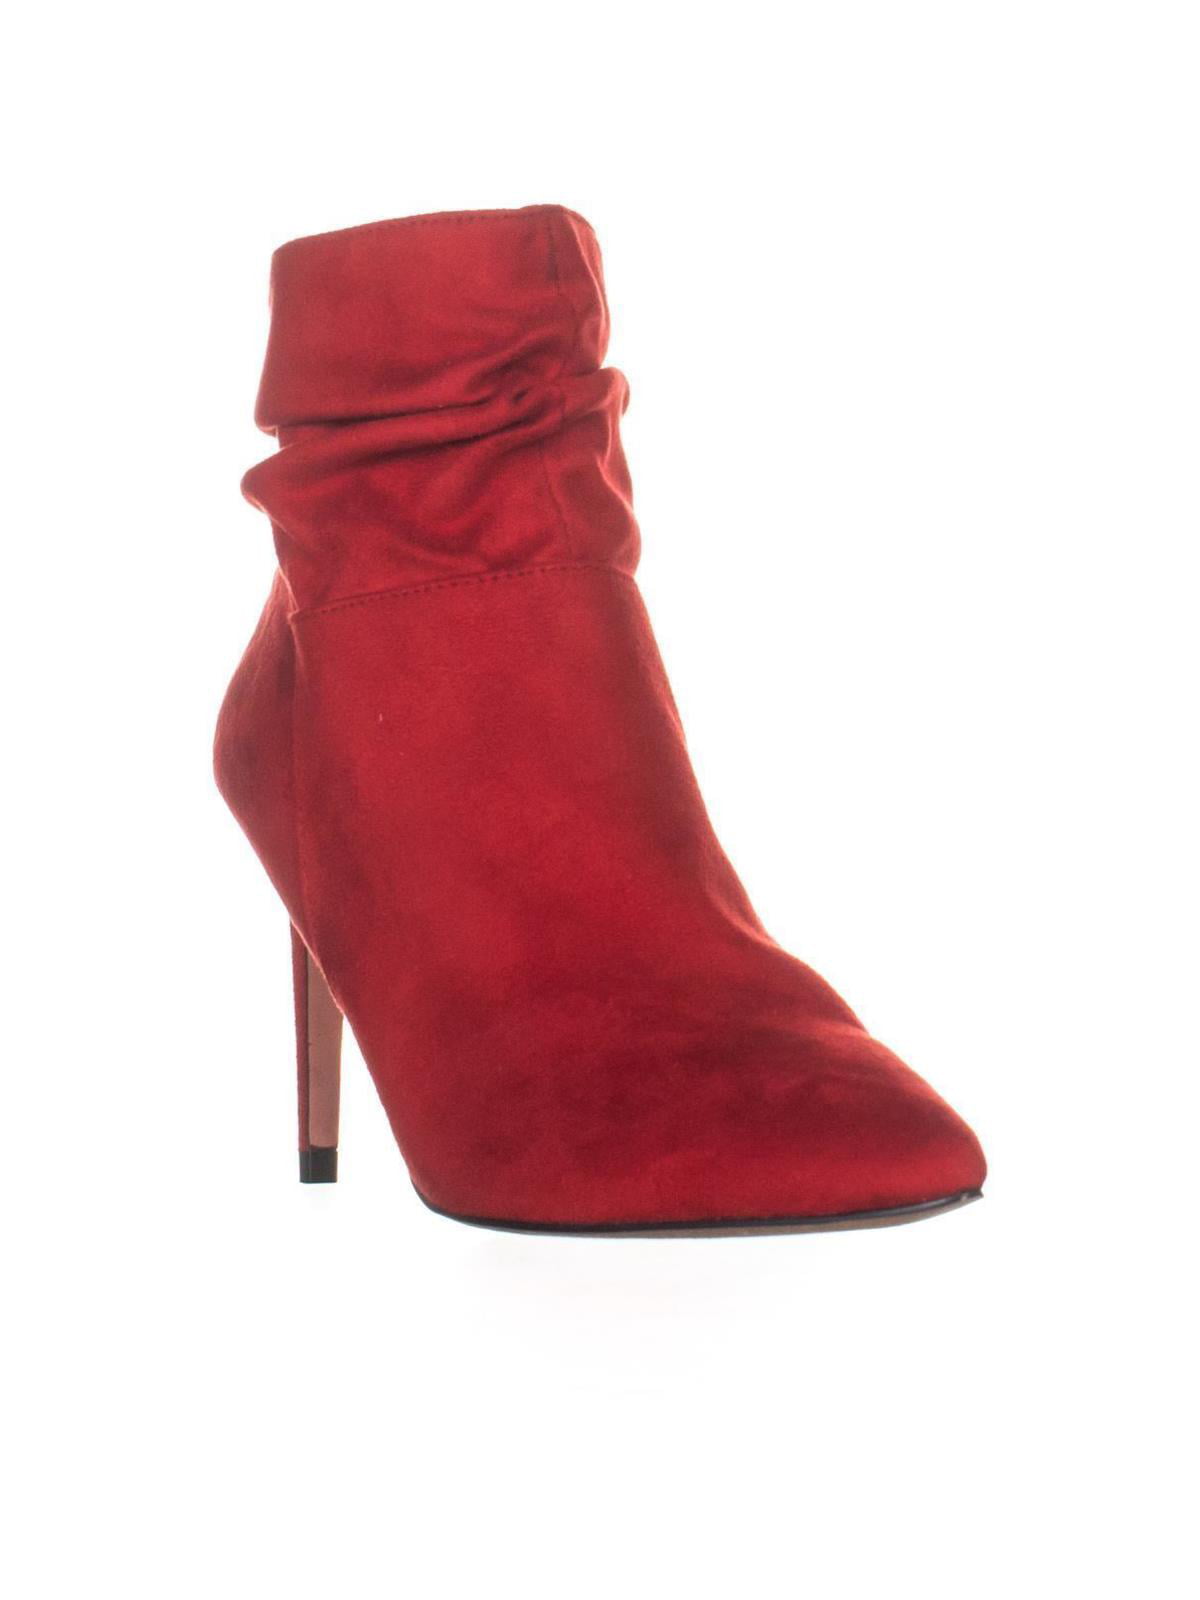 Womens XOXO Taniah Pointed Toe Ankle Boots, Red - Walmart.com